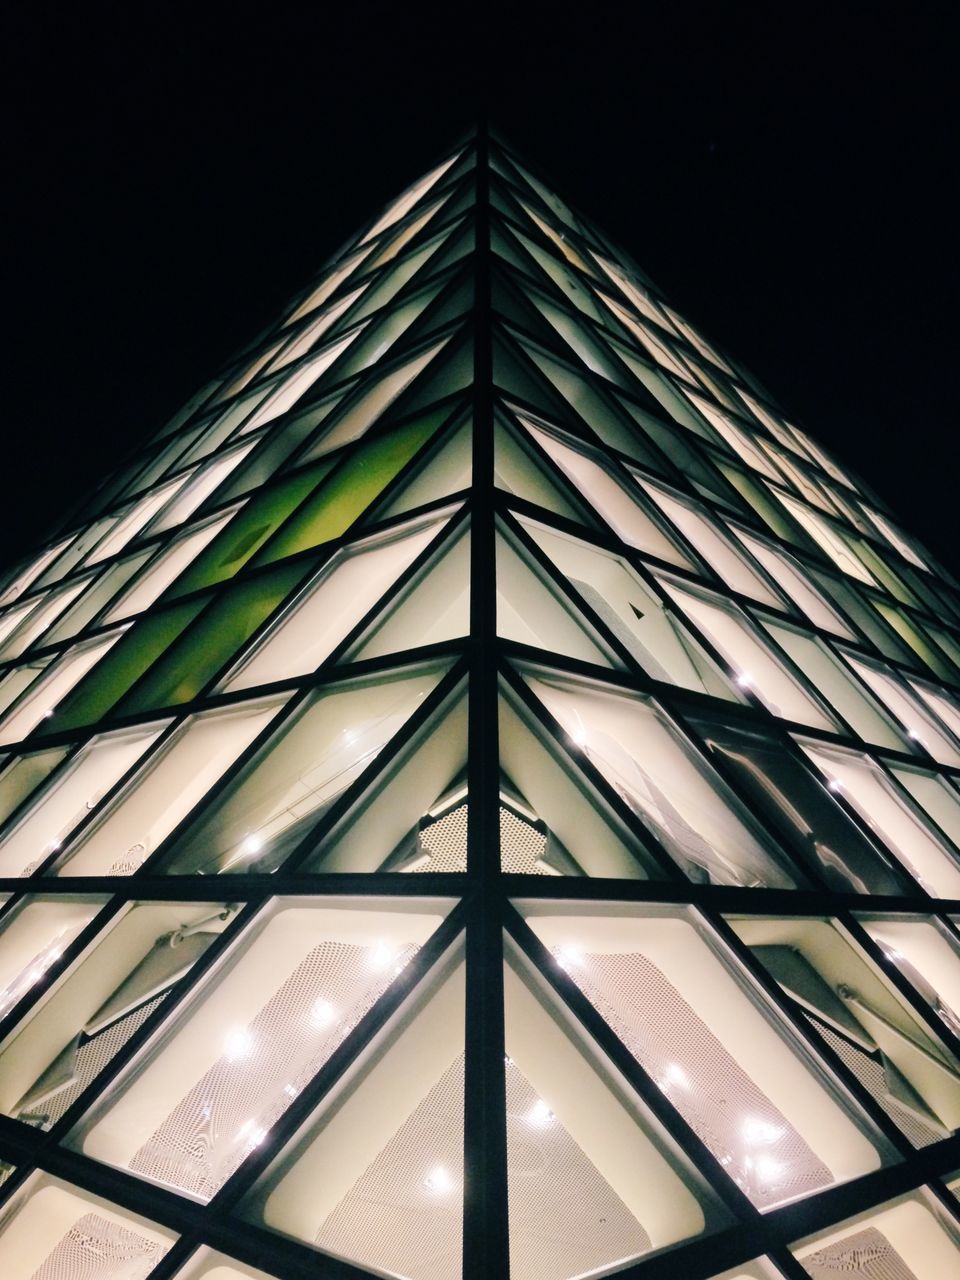 low angle view, architecture, built structure, modern, building exterior, glass - material, office building, tall - high, skyscraper, tower, city, pattern, sky, illuminated, architectural feature, building, night, clear sky, window, no people